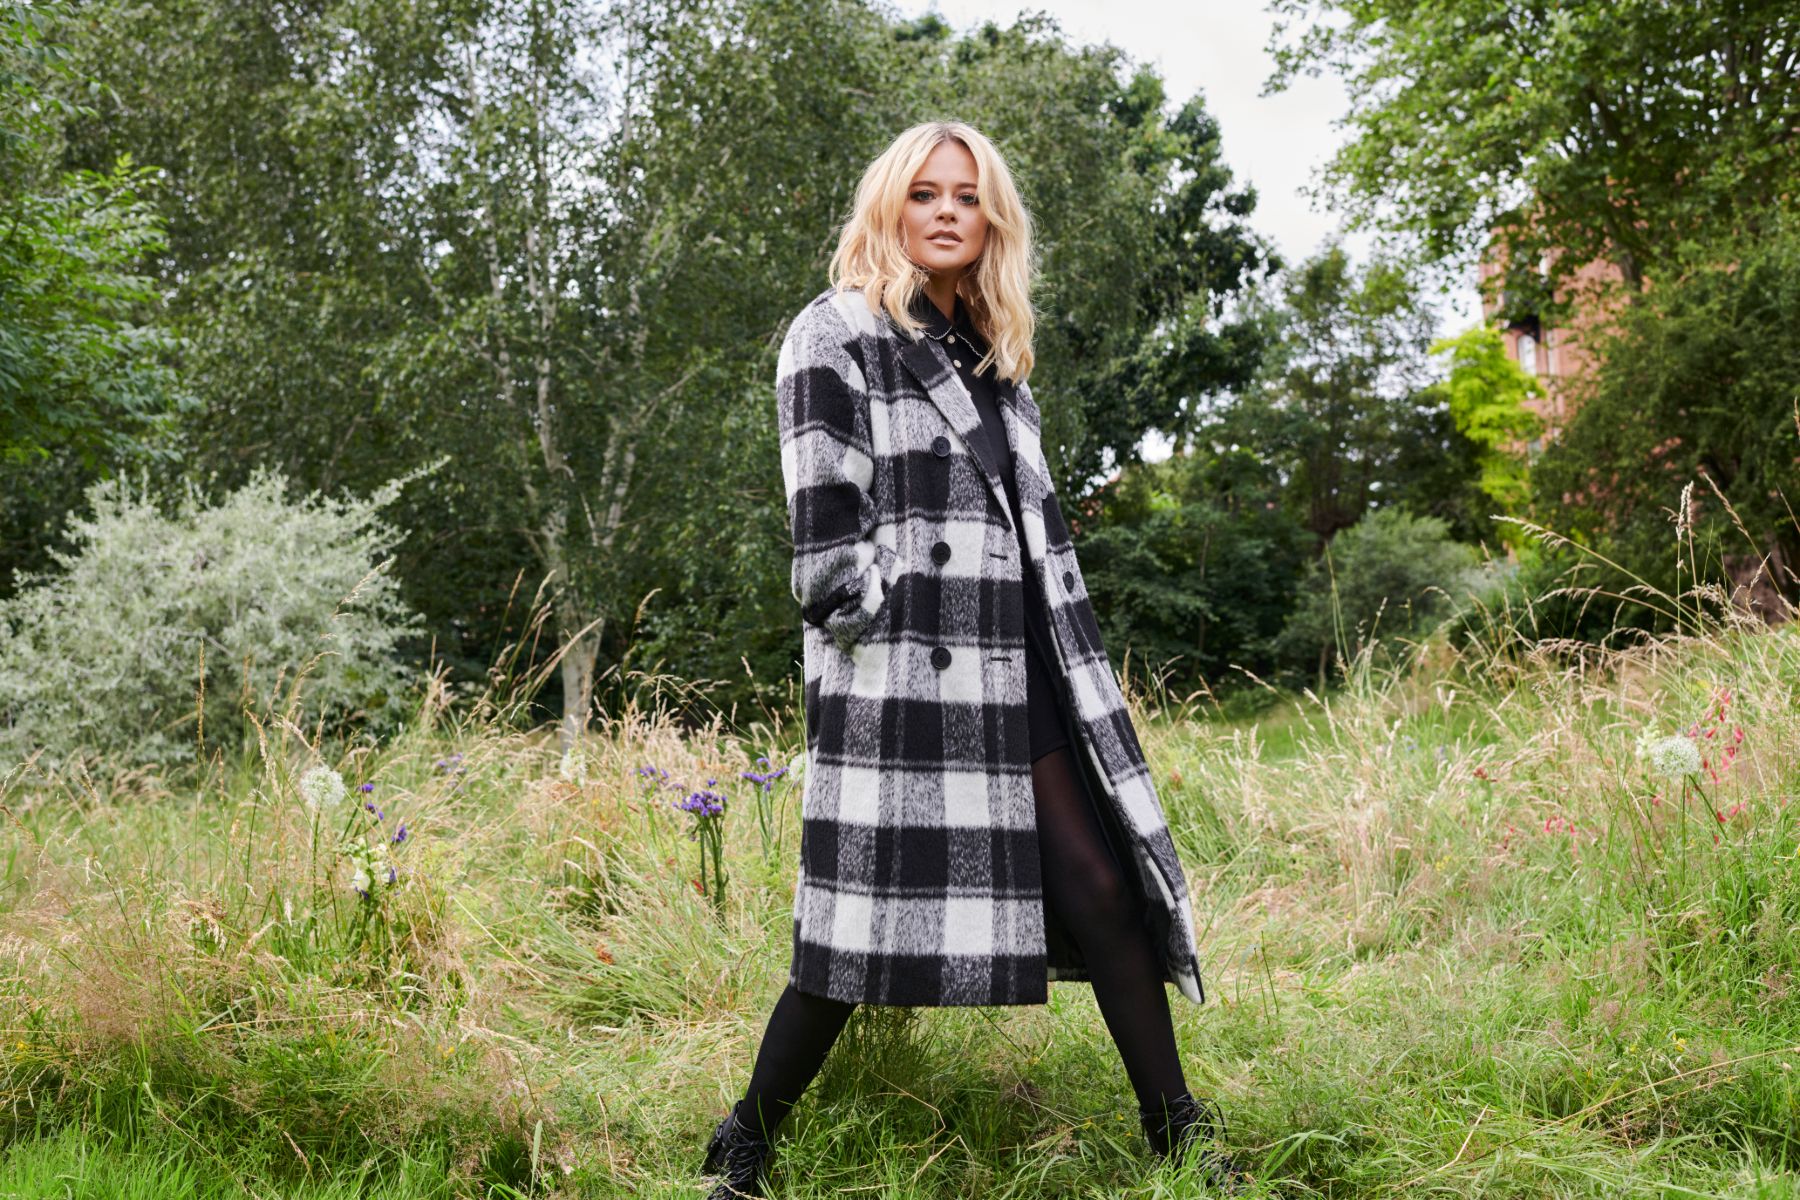 Emily Atack in New Look's Autumn/Winter Talent Campaign 2021